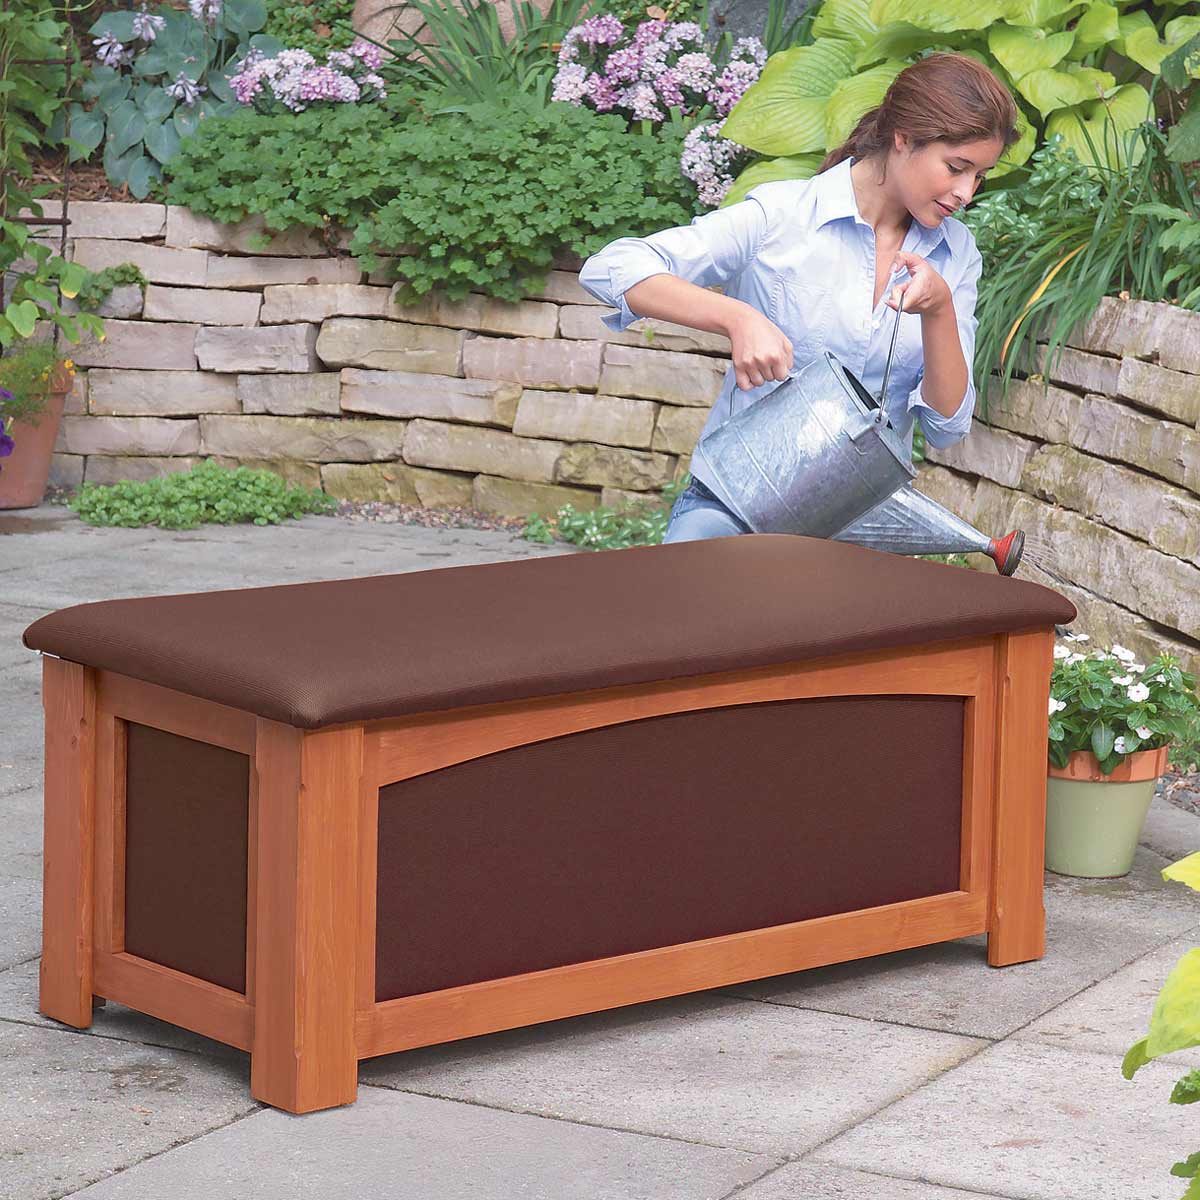 How to Build an Outdoor Storage Bench (DIY) | Family Handyman